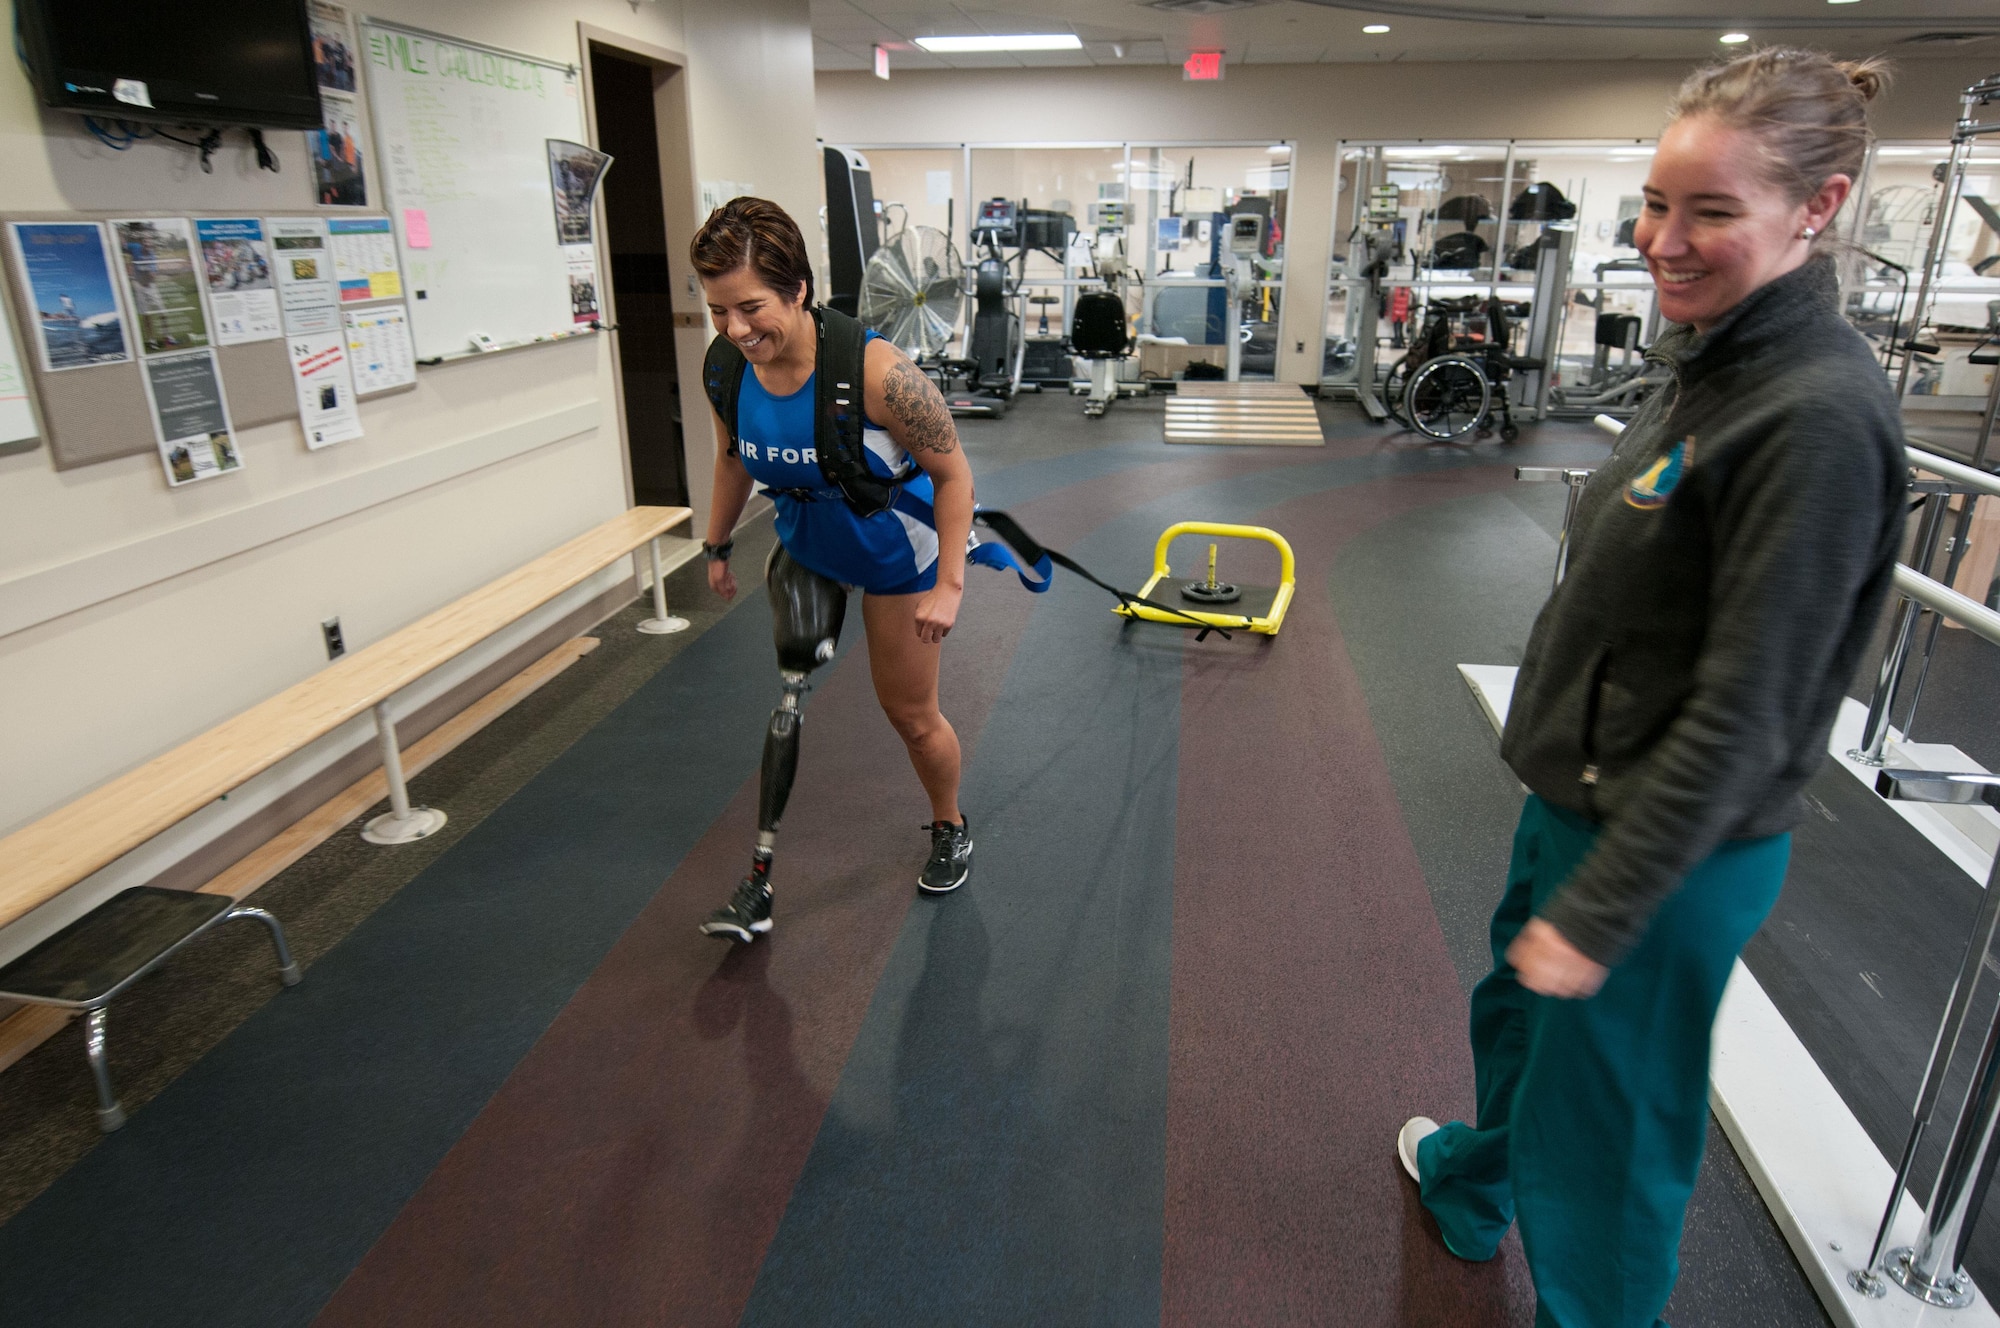 Staff Sgt. Sebastiana Lopez Arellano, a patient at Walter Reed National Military Medical Center, pulls a weighted sled around a track inside the center’s Military Advanced Training Center, which provides amputee patients with state-of-the-art care, in Bethesda, Md., April 16, 2016. Lopez lost her right leg and suffered several other injuries in a motorcycle crash in 2015. She now uses sports and fitness as part of her physical and occupational therapy regimen. (U.S. Air Force photo/Sean Kimmons)